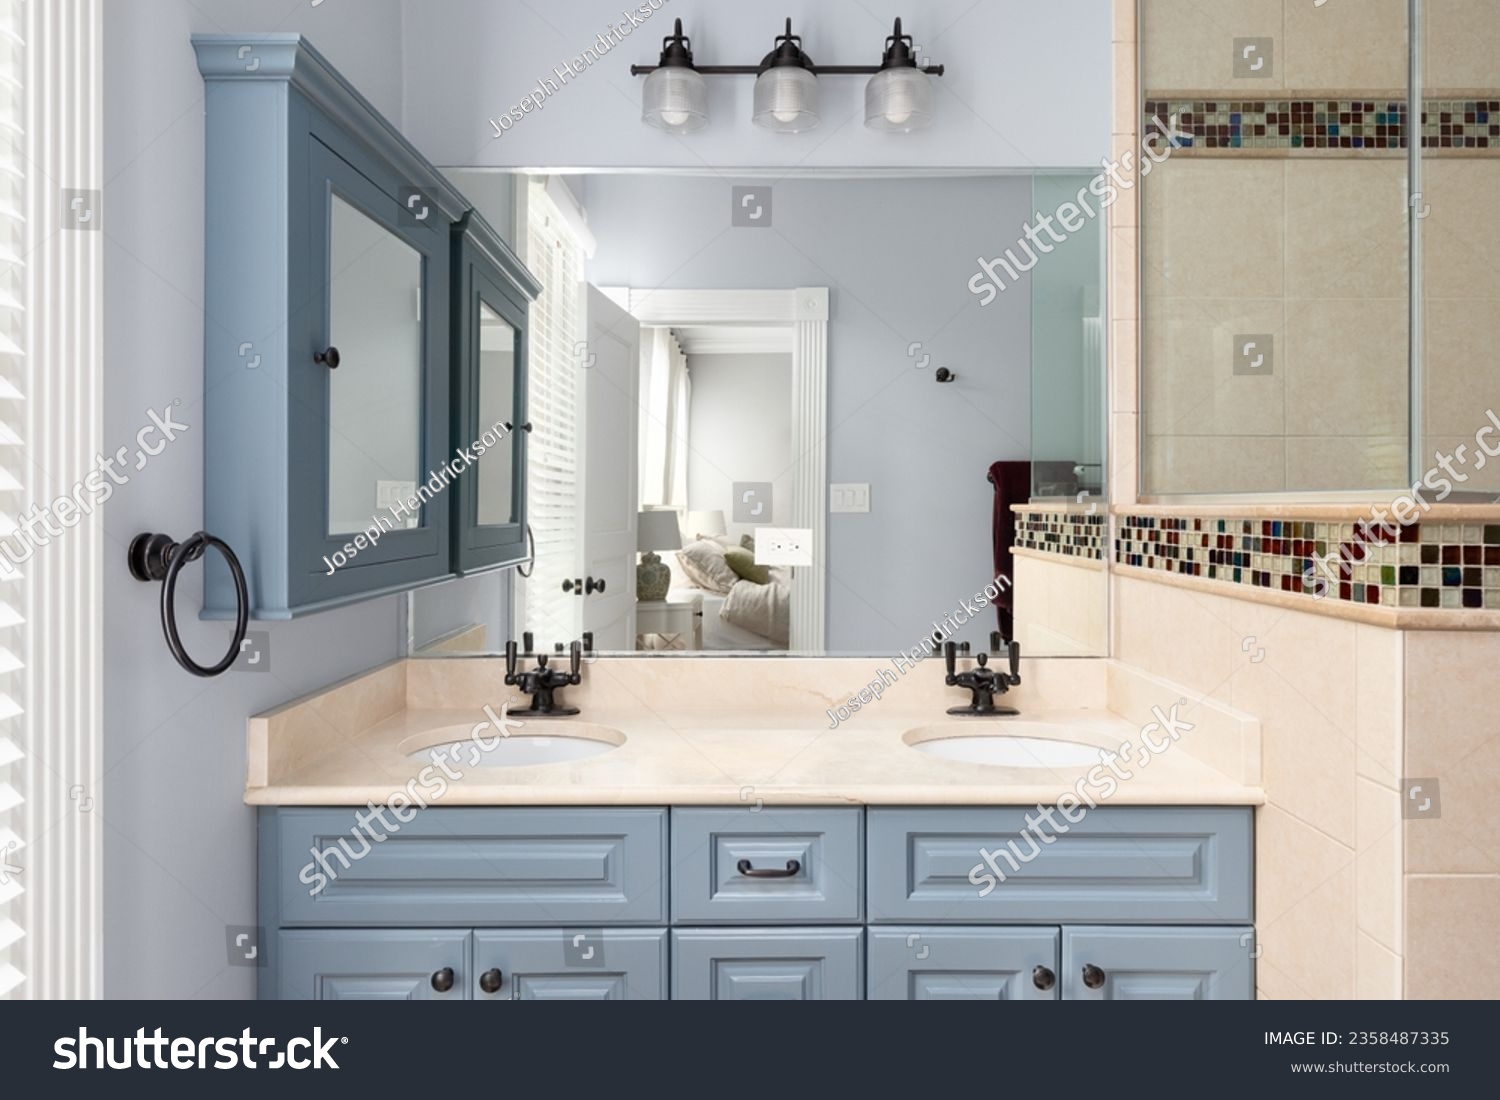 A bathroom with blue cabinet and medicine cabinet, a marble countertop, tiled shower, and view towards the primary bedroom. #2358487335